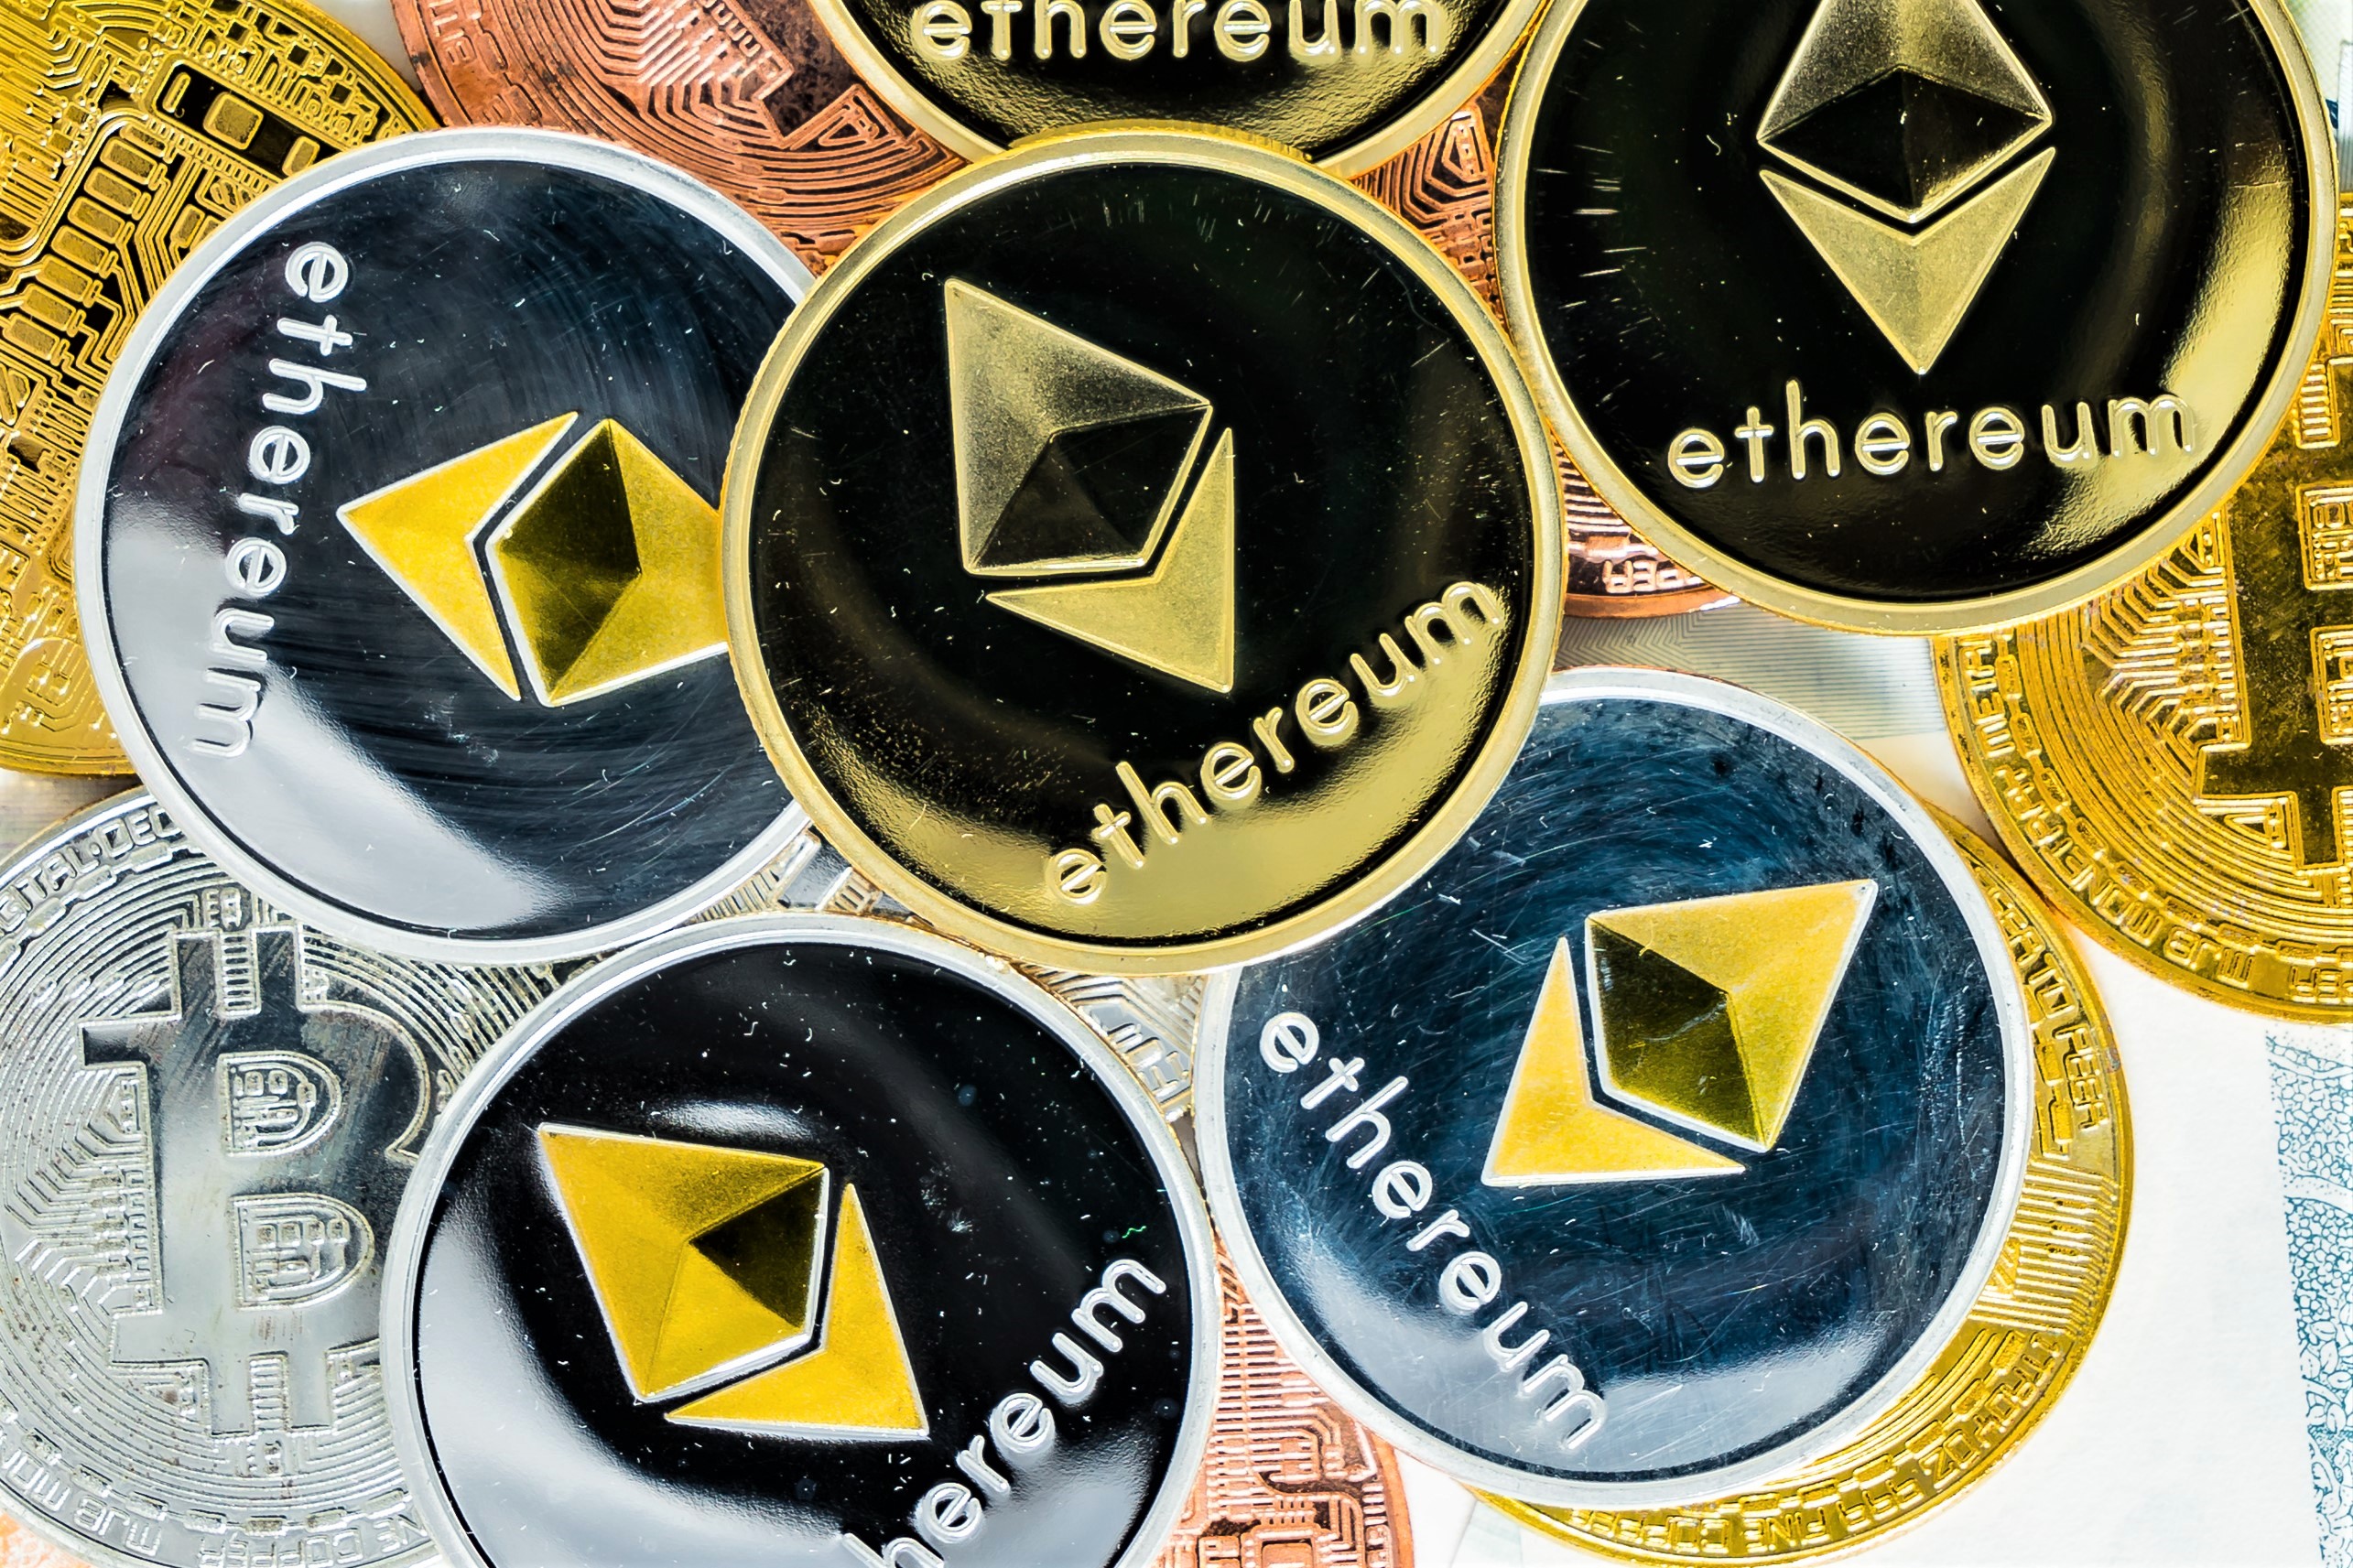 How will Futures Affect Ethereum? The Community Try to Guess